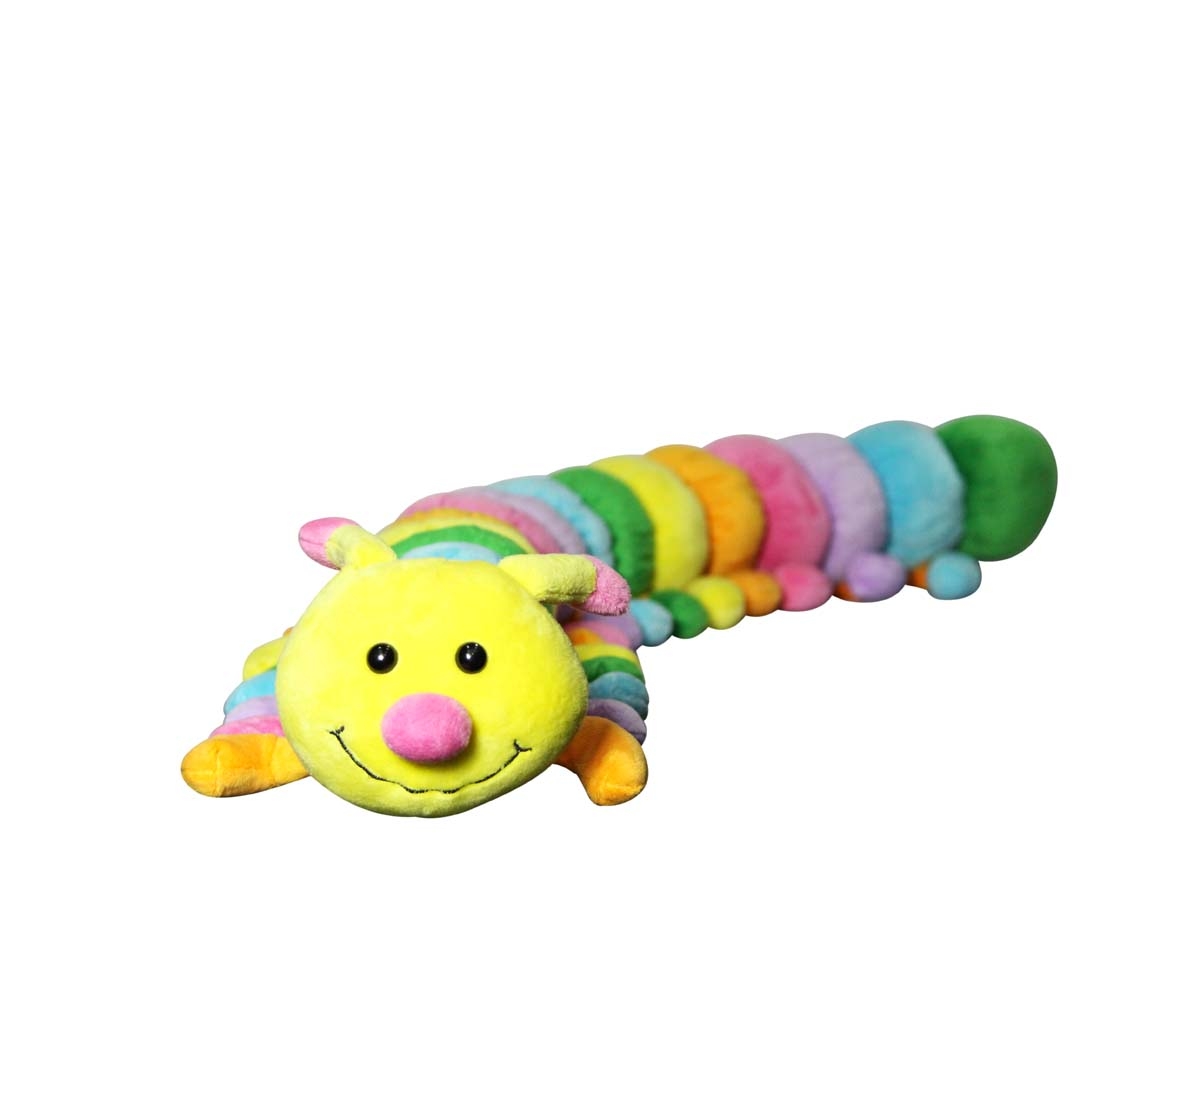 SOFT BUDDIES |  Soft Buddies Caterpillar Jungle Animal Car Rear Tray Table (Xl) Quirky Soft Toys for Kids age 12M+ 12.7 Cm 